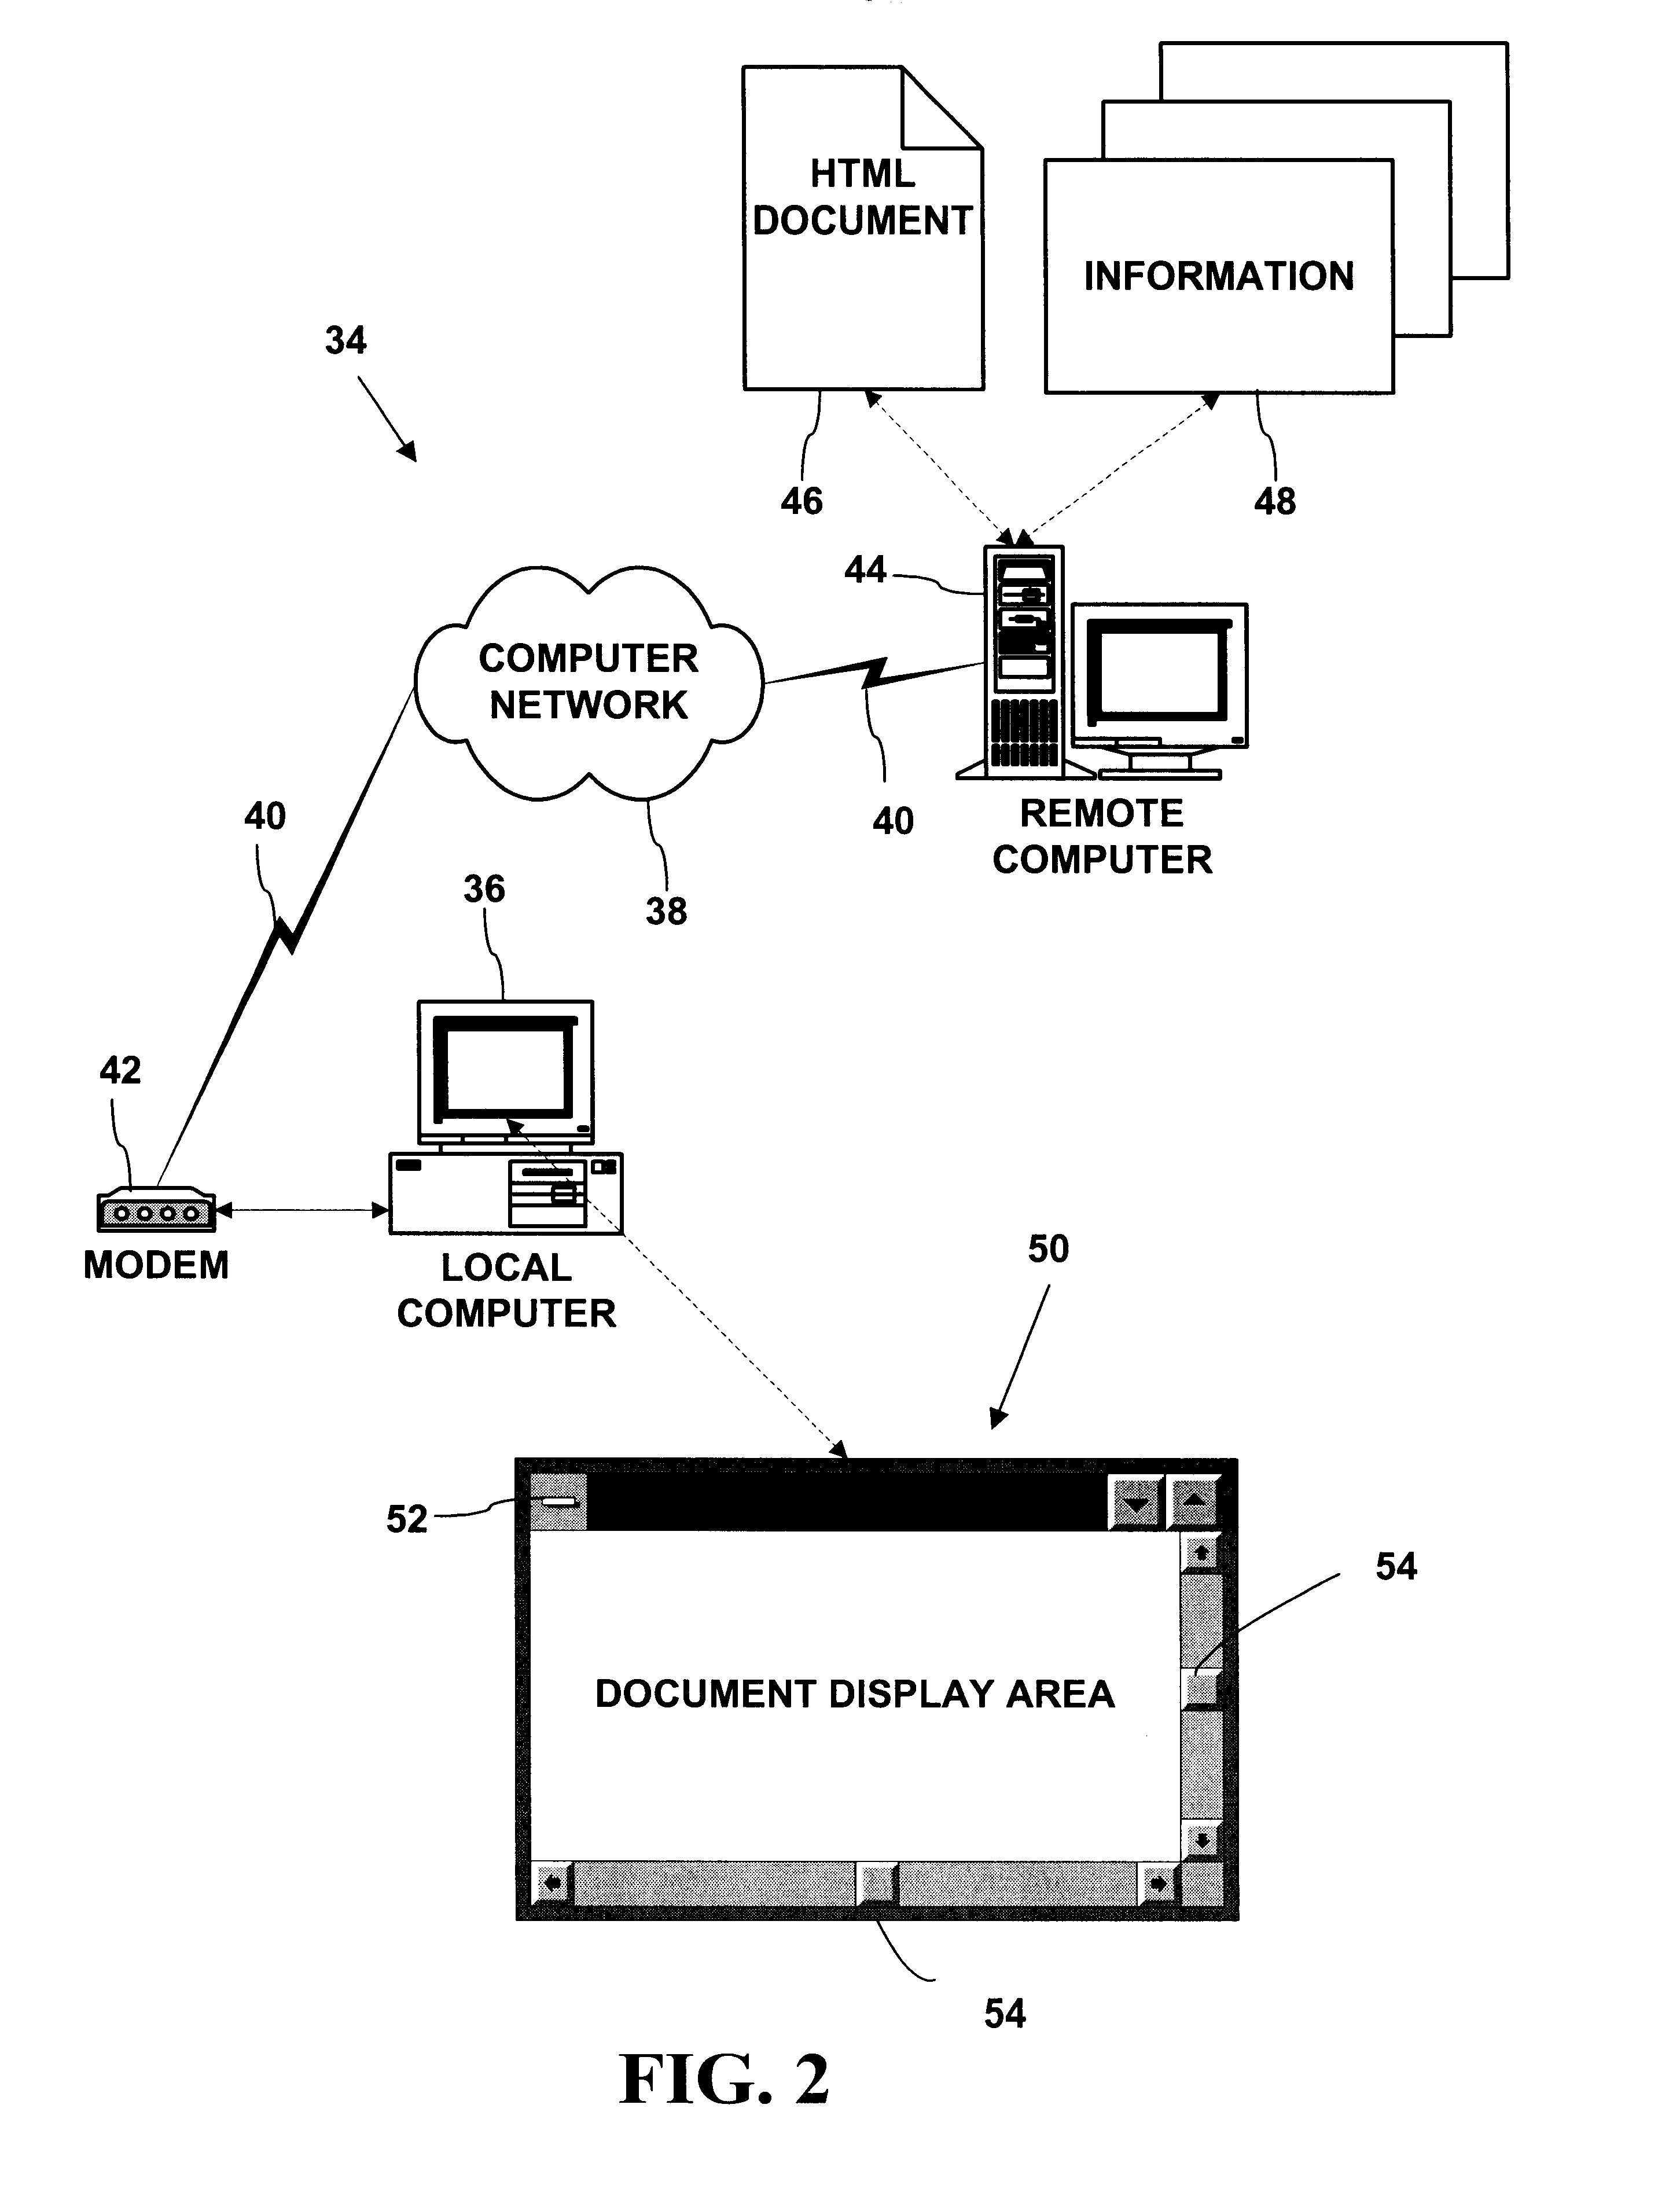 Automatic software downloading from a computer network